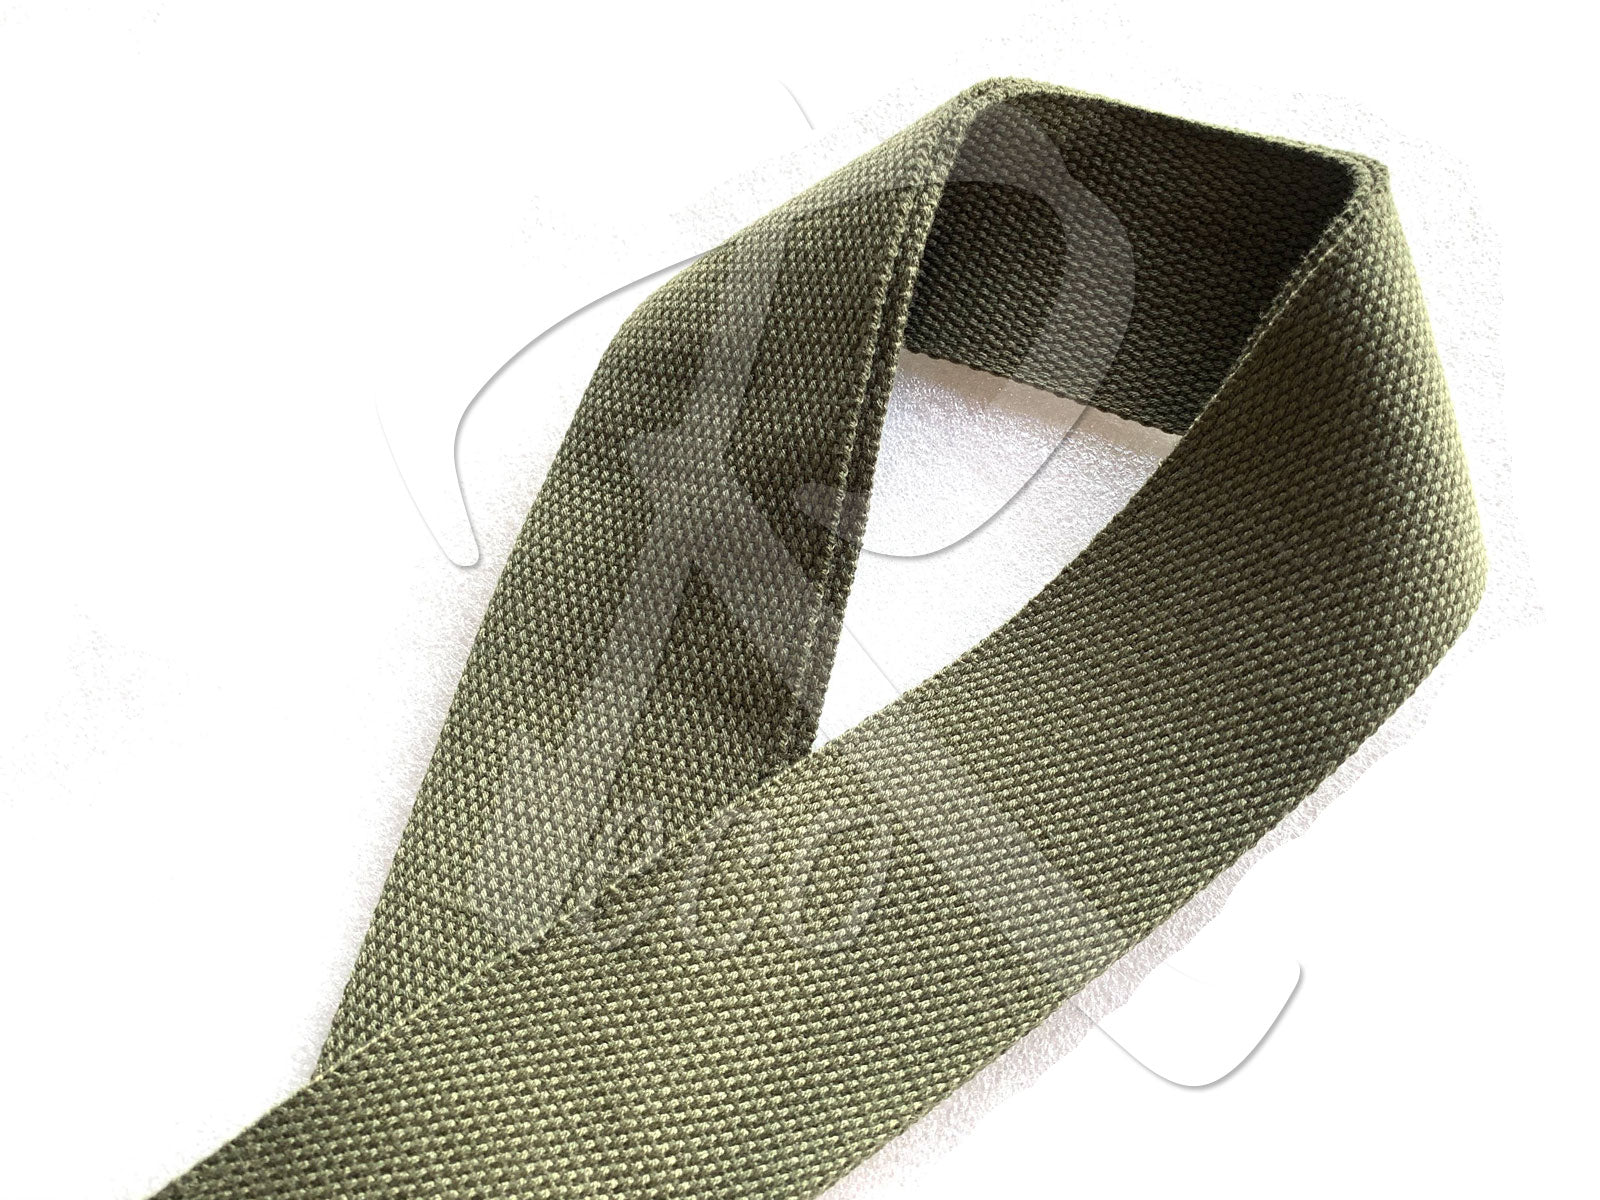 RM Cotton Guitar Strap Basic Guitar Strap Thick End - Reco Music Malaysia